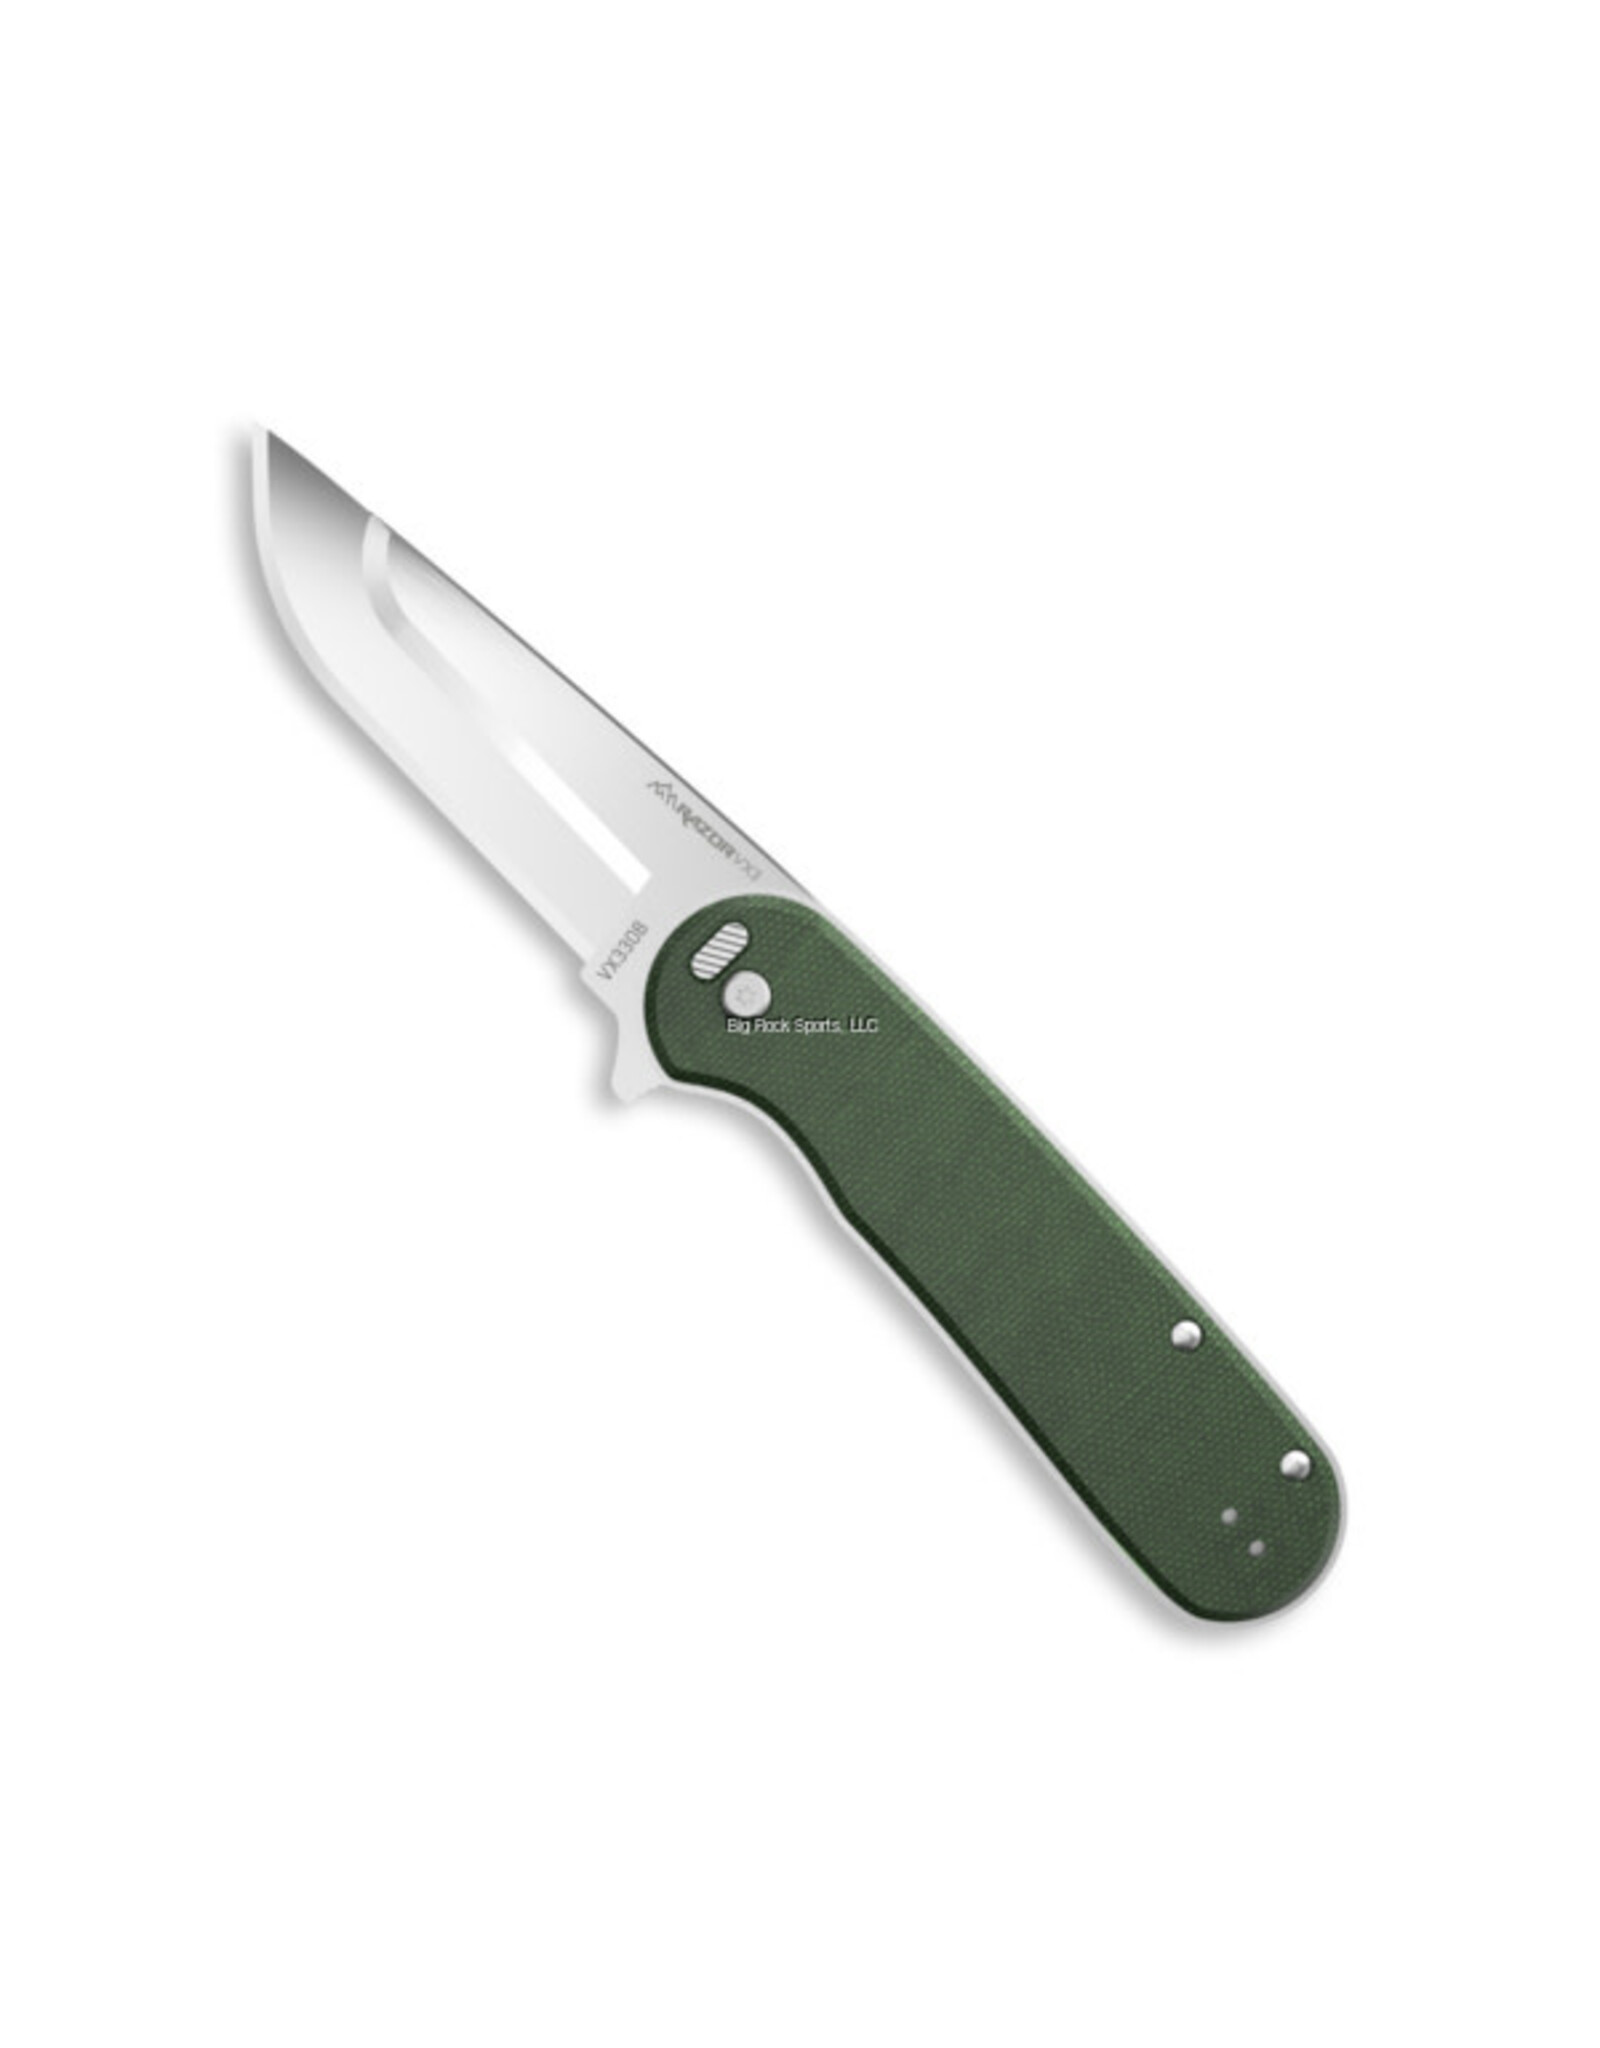 Outdoor Edge OUTDOOR EDGE RAZOR VX3 | Replaceable Blade EDC Flipper Folding Pocket Knife | 3" Blade, Ball Bearings, Green Micarta G-10 Stainless Steel Handle, Reversible Pocket Clip | Outdoor, Camping, Utility